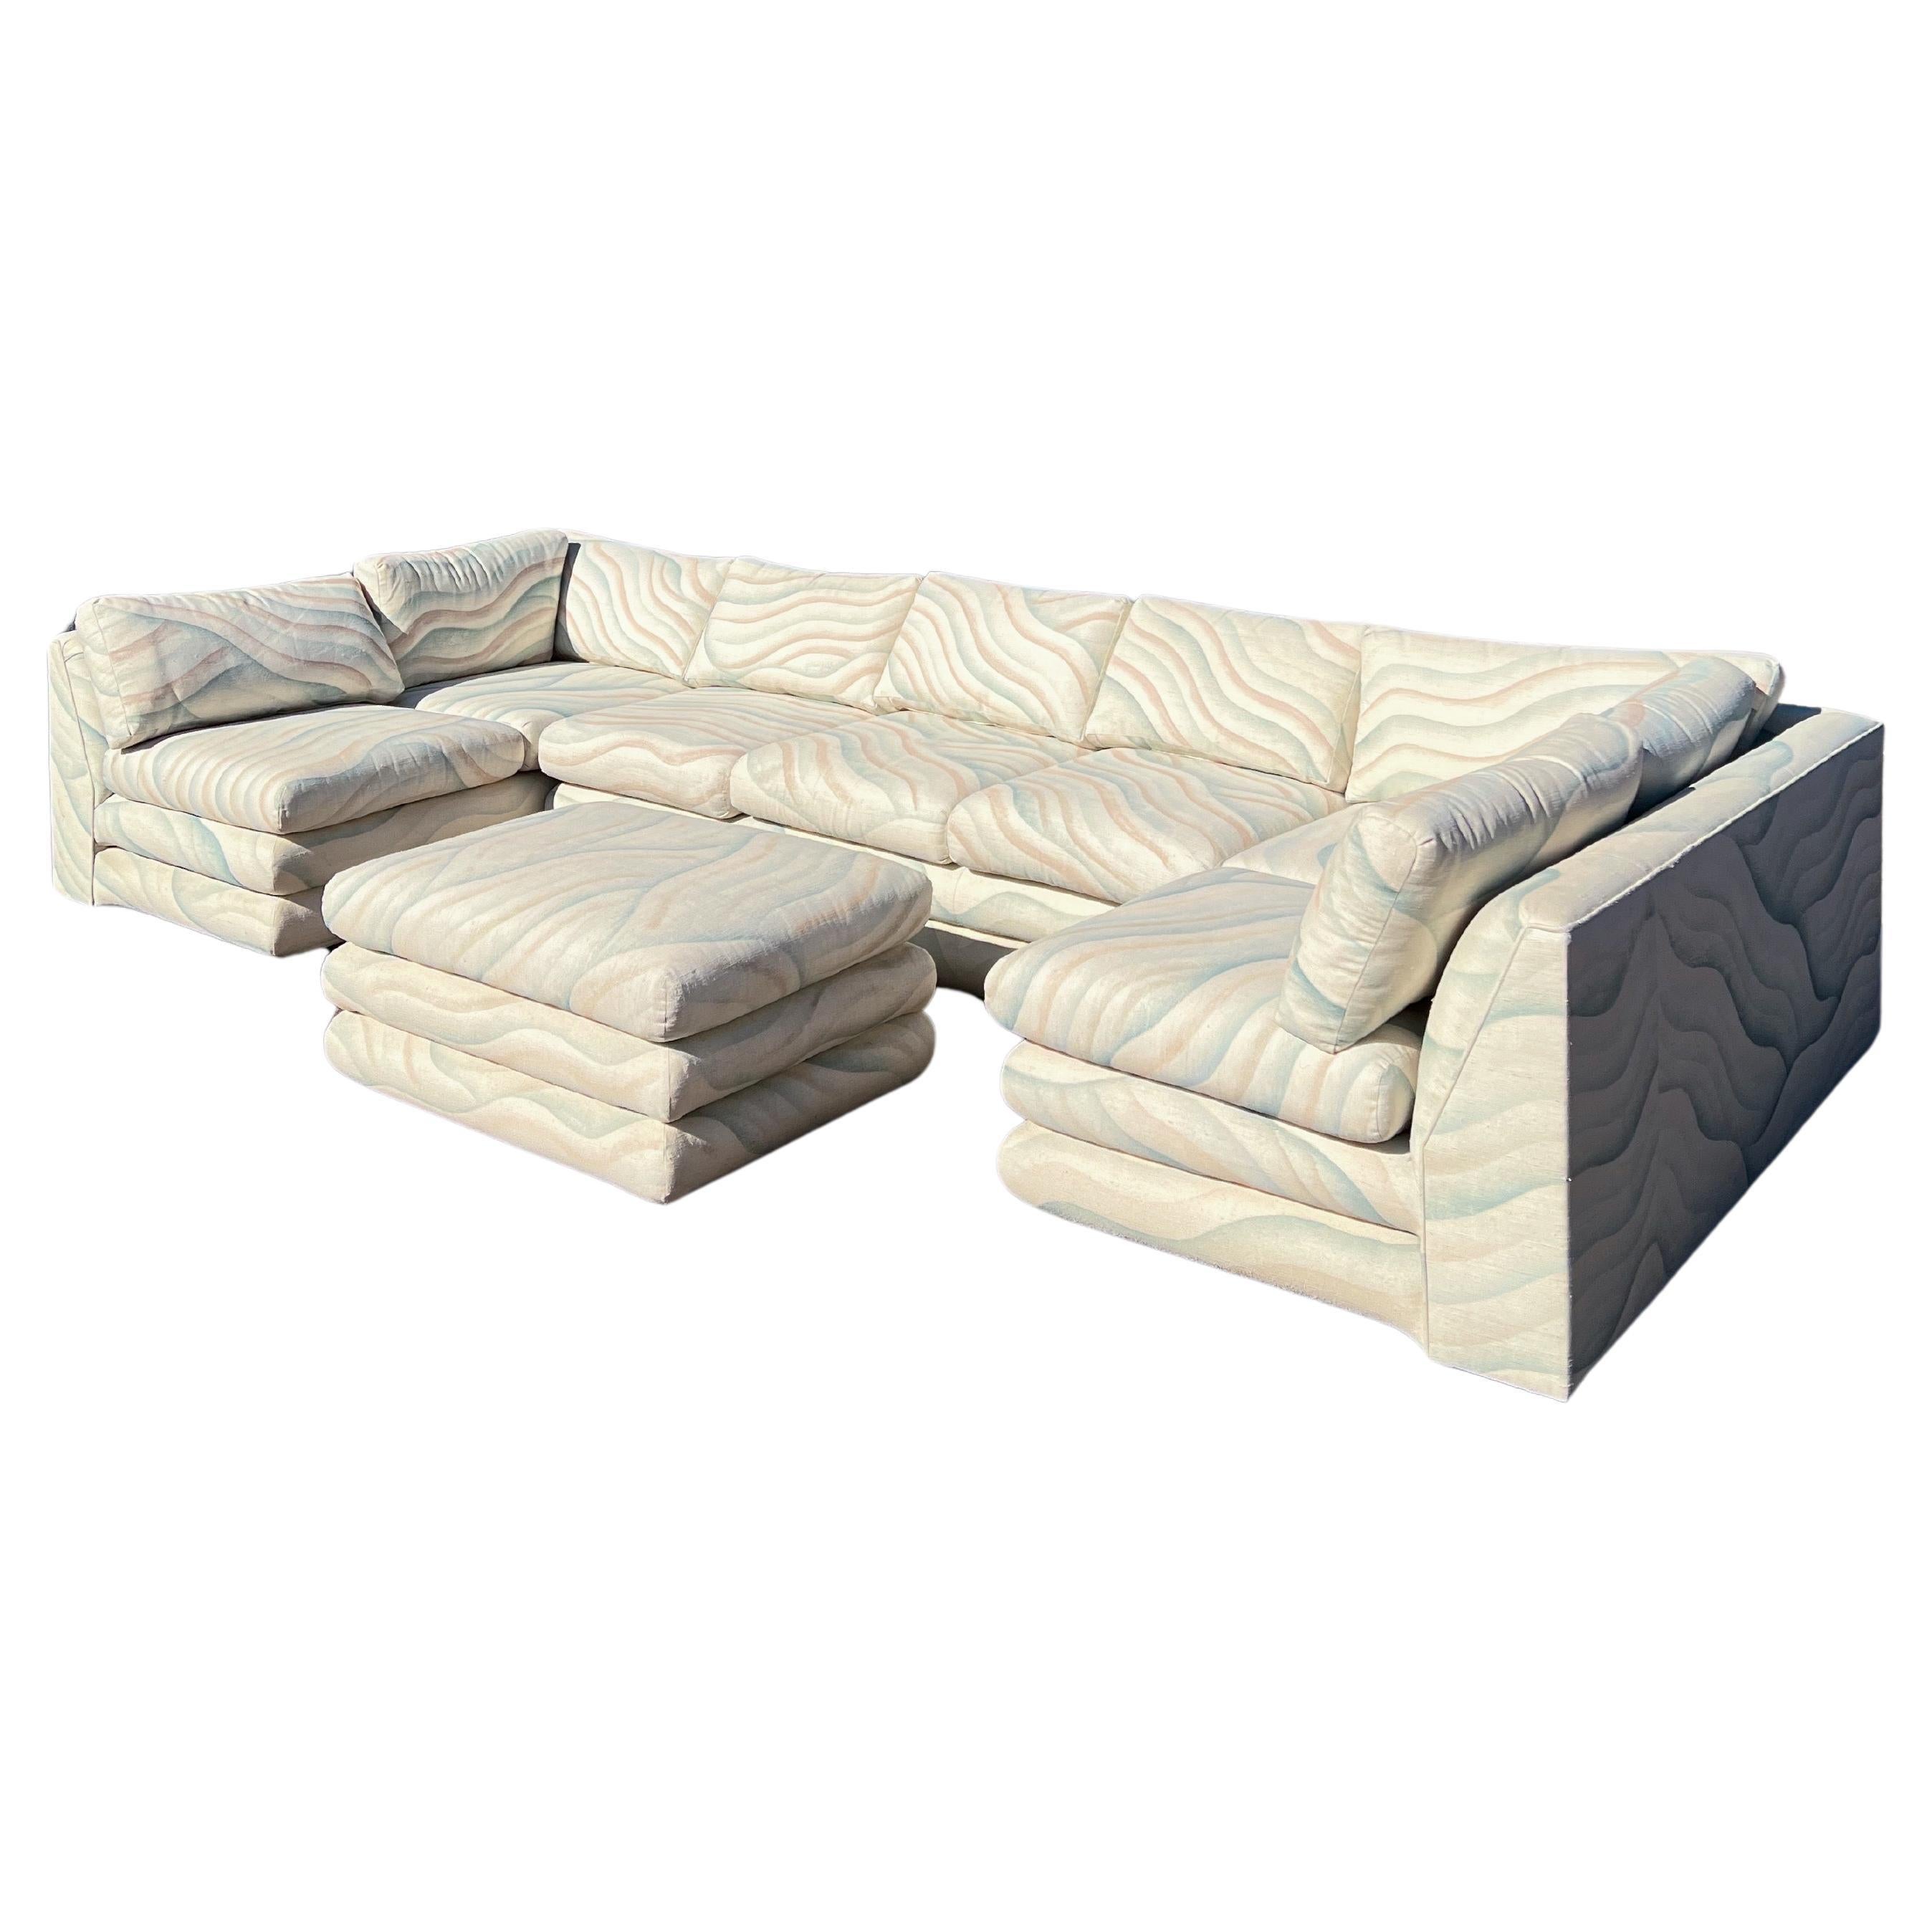 Vintage four piece modular sectional produced by A. Rudin, design attributed to Steven Chase. 

Stacked bullnose details. Four pieces; three body and one ottoman. Two identical chaise style pieces and one long armless three-seater. Can be displayed